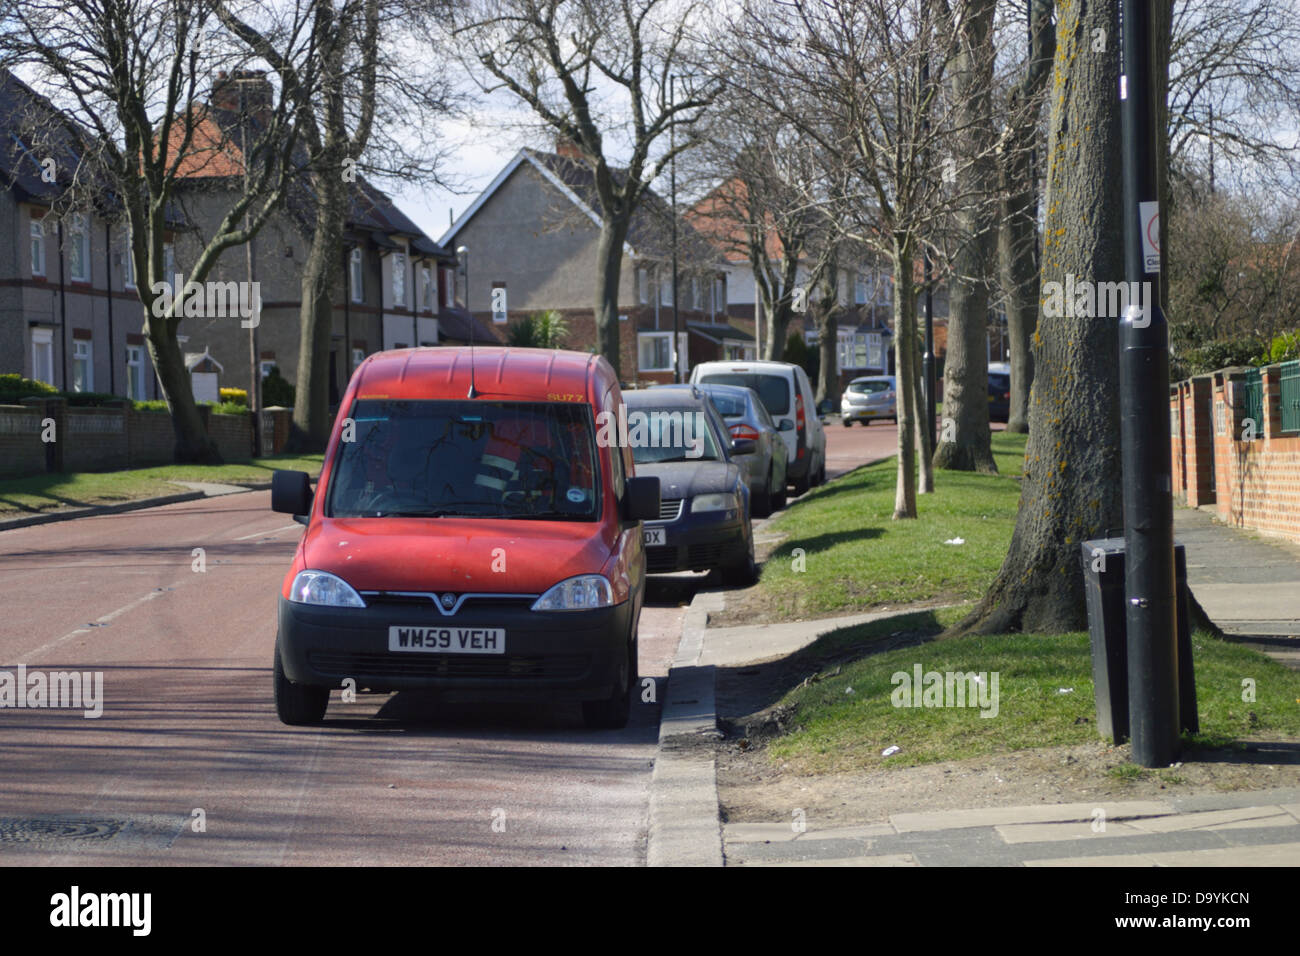 Royal mail, post office van parked at side of road, red post van. Grangetown, sunderland,tyne and wear england. Stock Photo